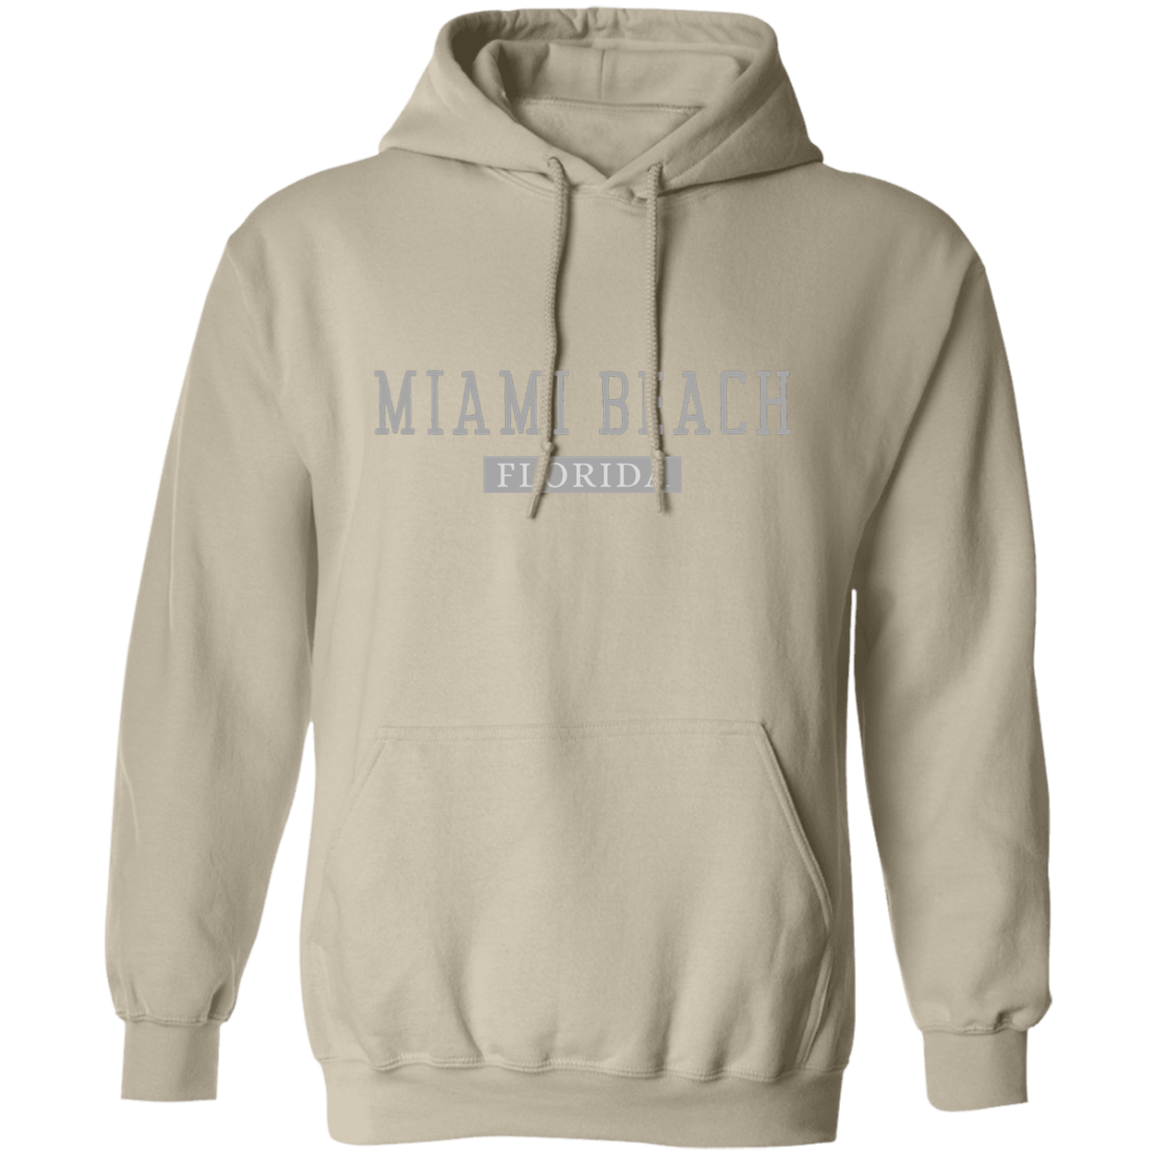 College Pullover Hoodie Miami Beach, Birthday Gift Hoodie